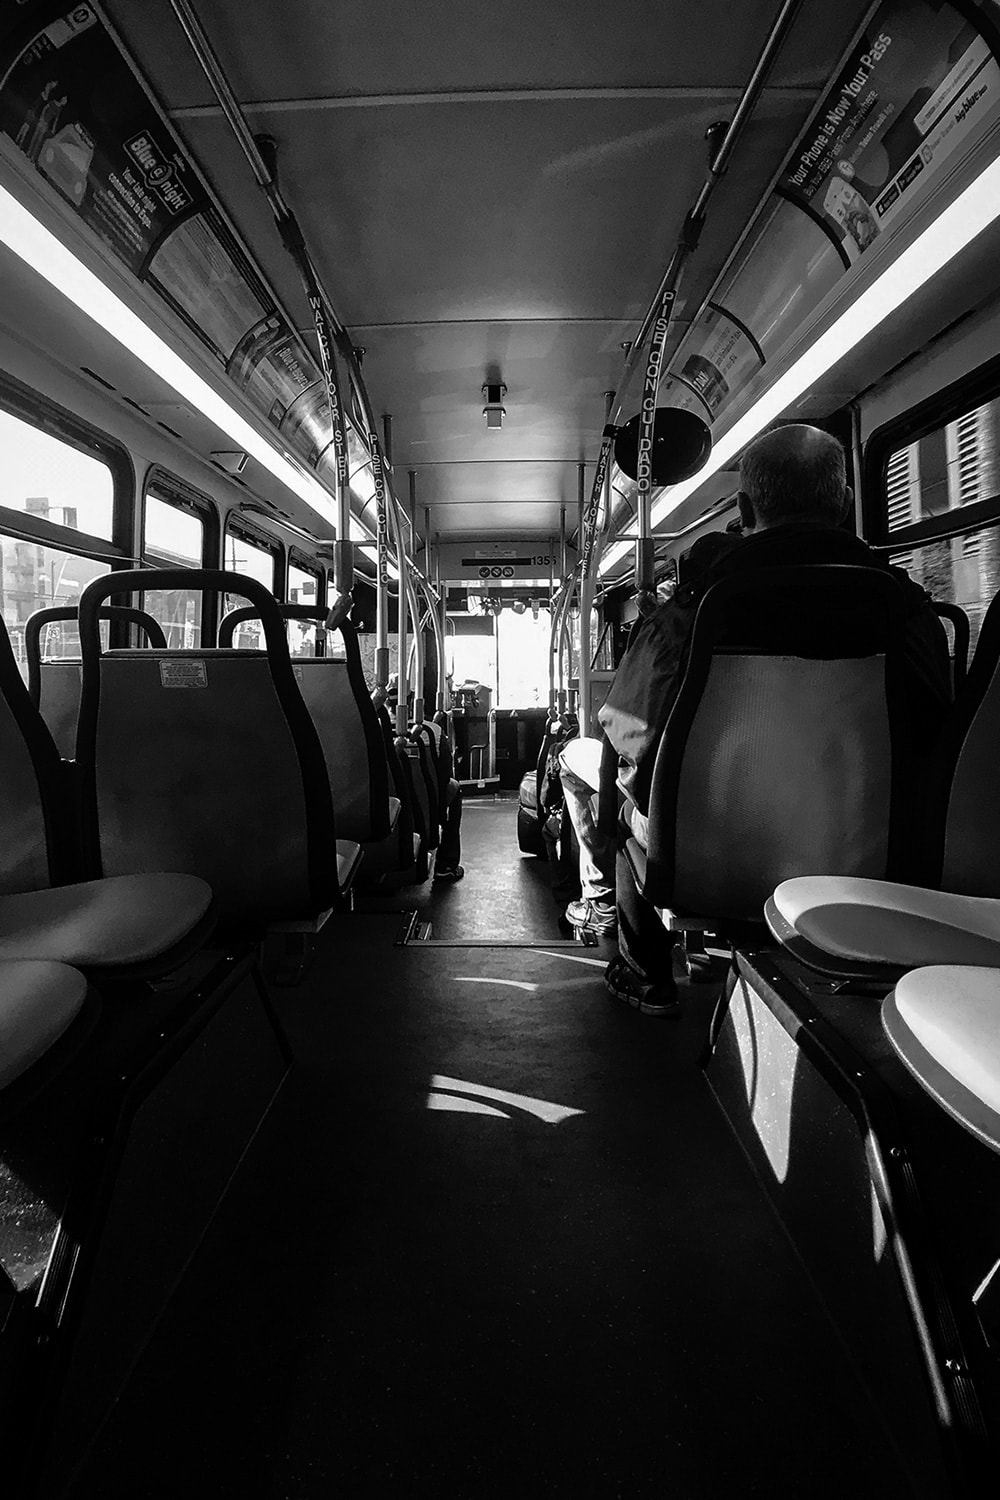 Black and white portrait photo of a man sitting on the bus. The photo is taken from the back of the bus looking forward so the interior lights, and walkway create leading lines towards the bus driver.